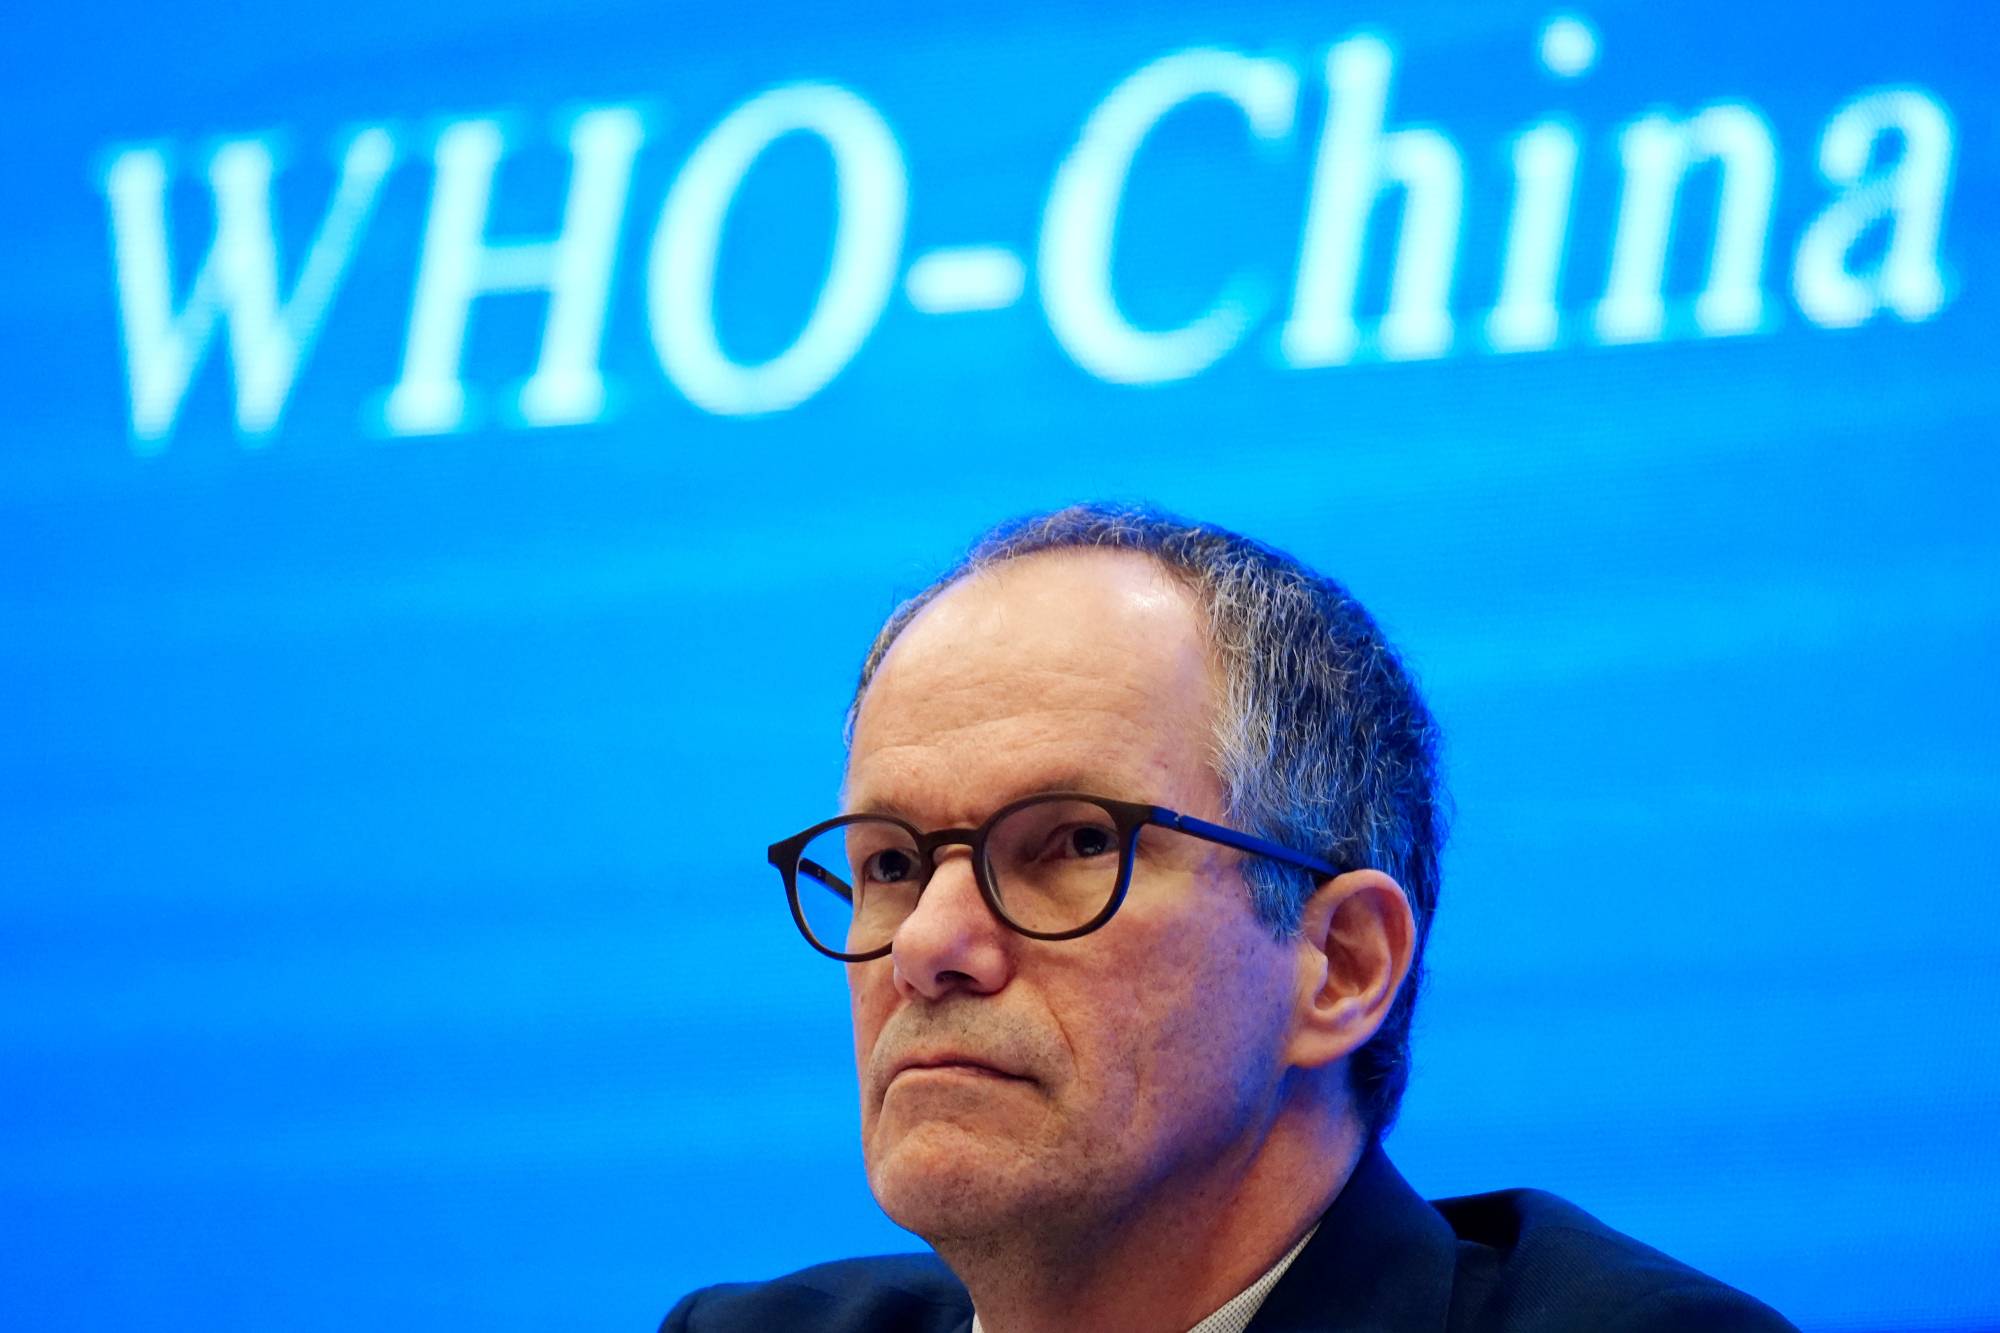 Peter Ben Embarek, a member of the World Health Organization (WHO) team tasked with investigating the origins of the coronavirus disease (COVID-19), attends the WHO-China joint study news conference at a hotel in Wuhan, Hubei province, China February 9, 2021. REUTERS/Aly Song